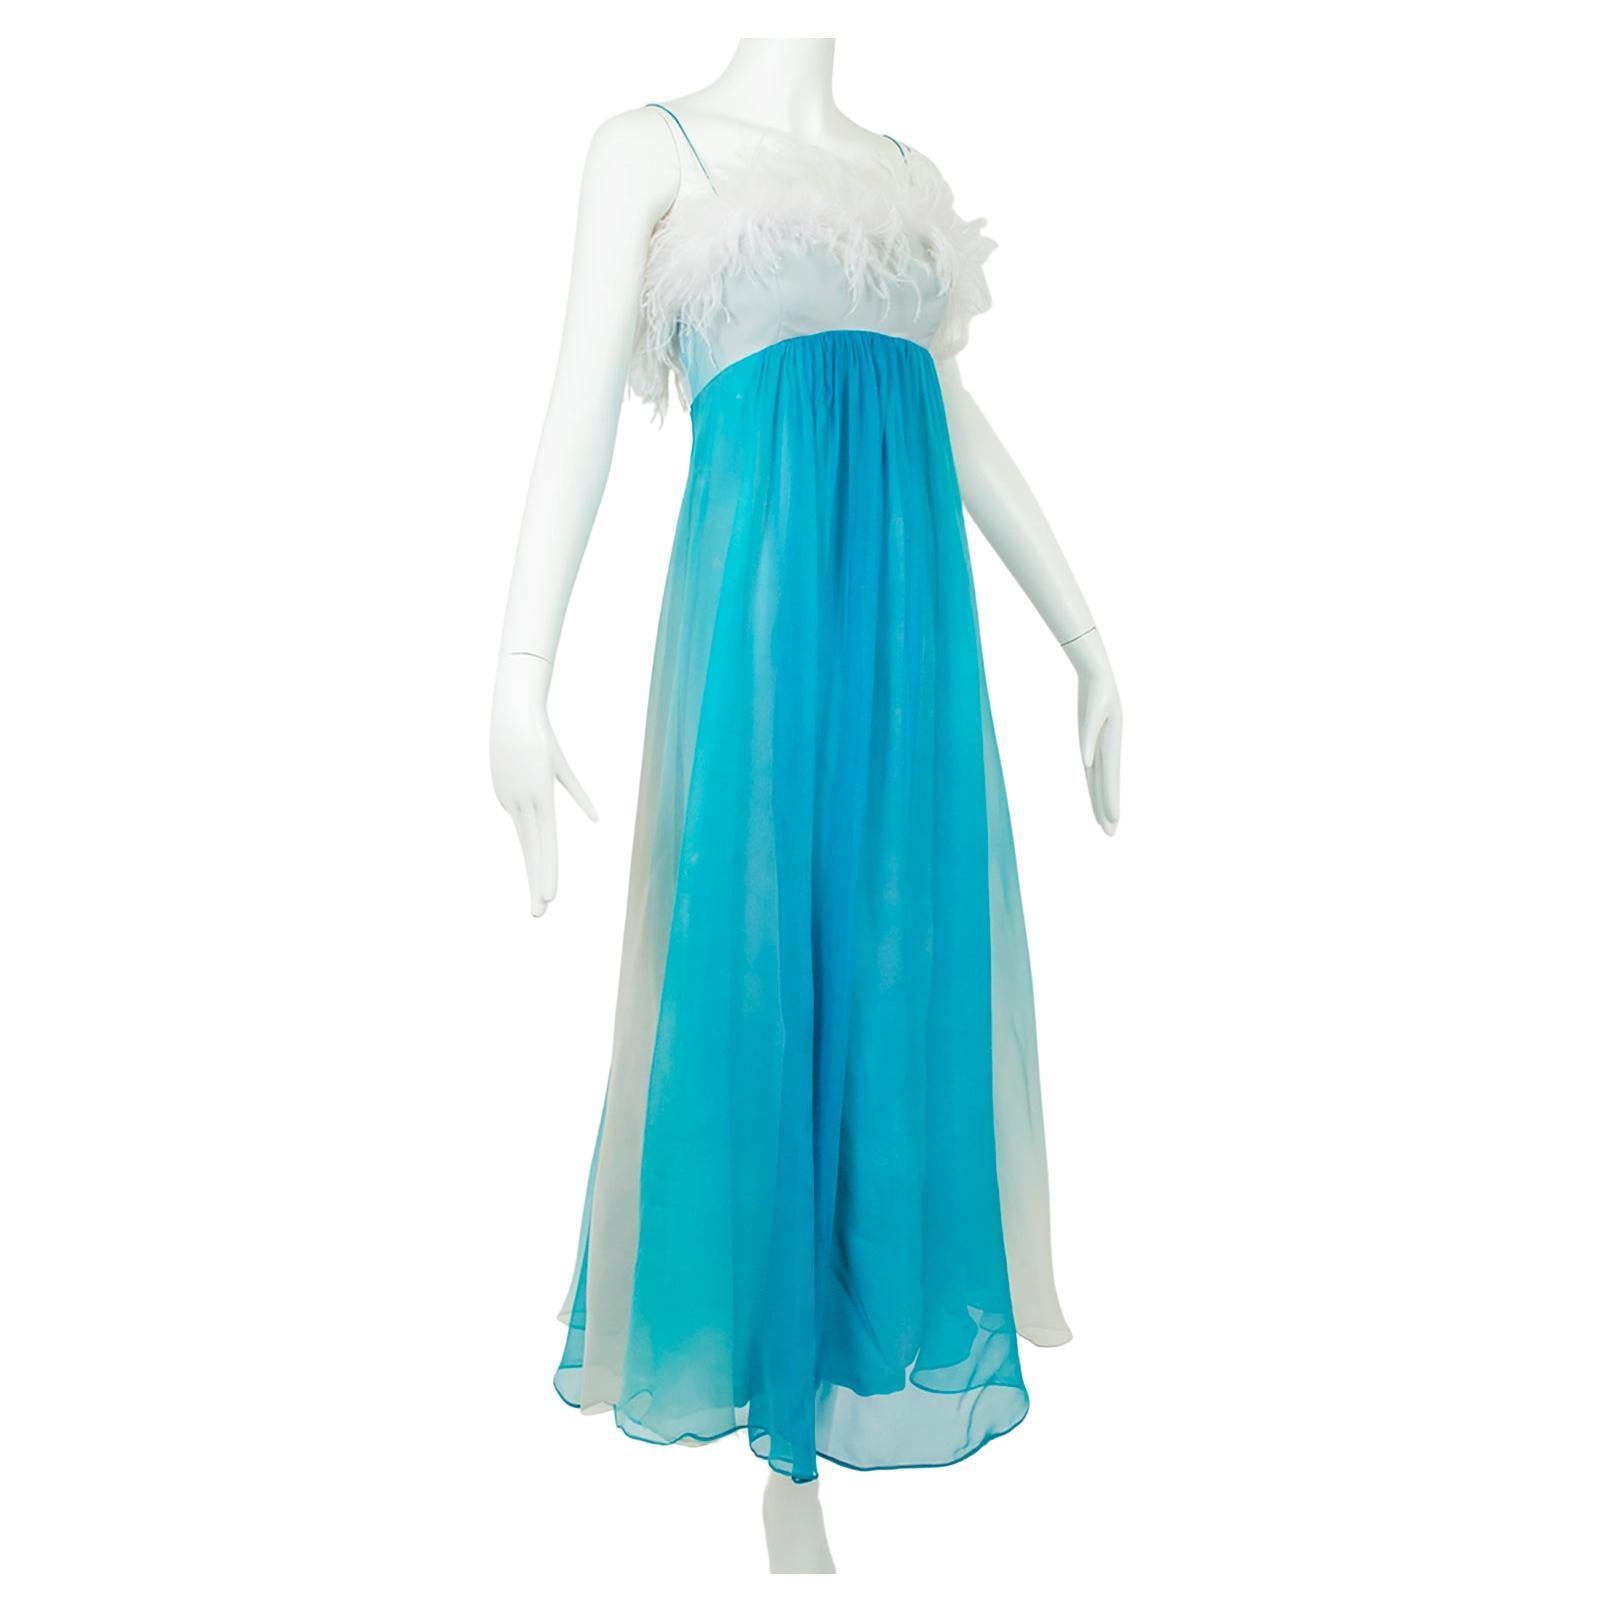 Aqua Ombré Tie Dye Chiffon Ball Gown with Ostrich Feather Trim – XS, 1960s For Sale